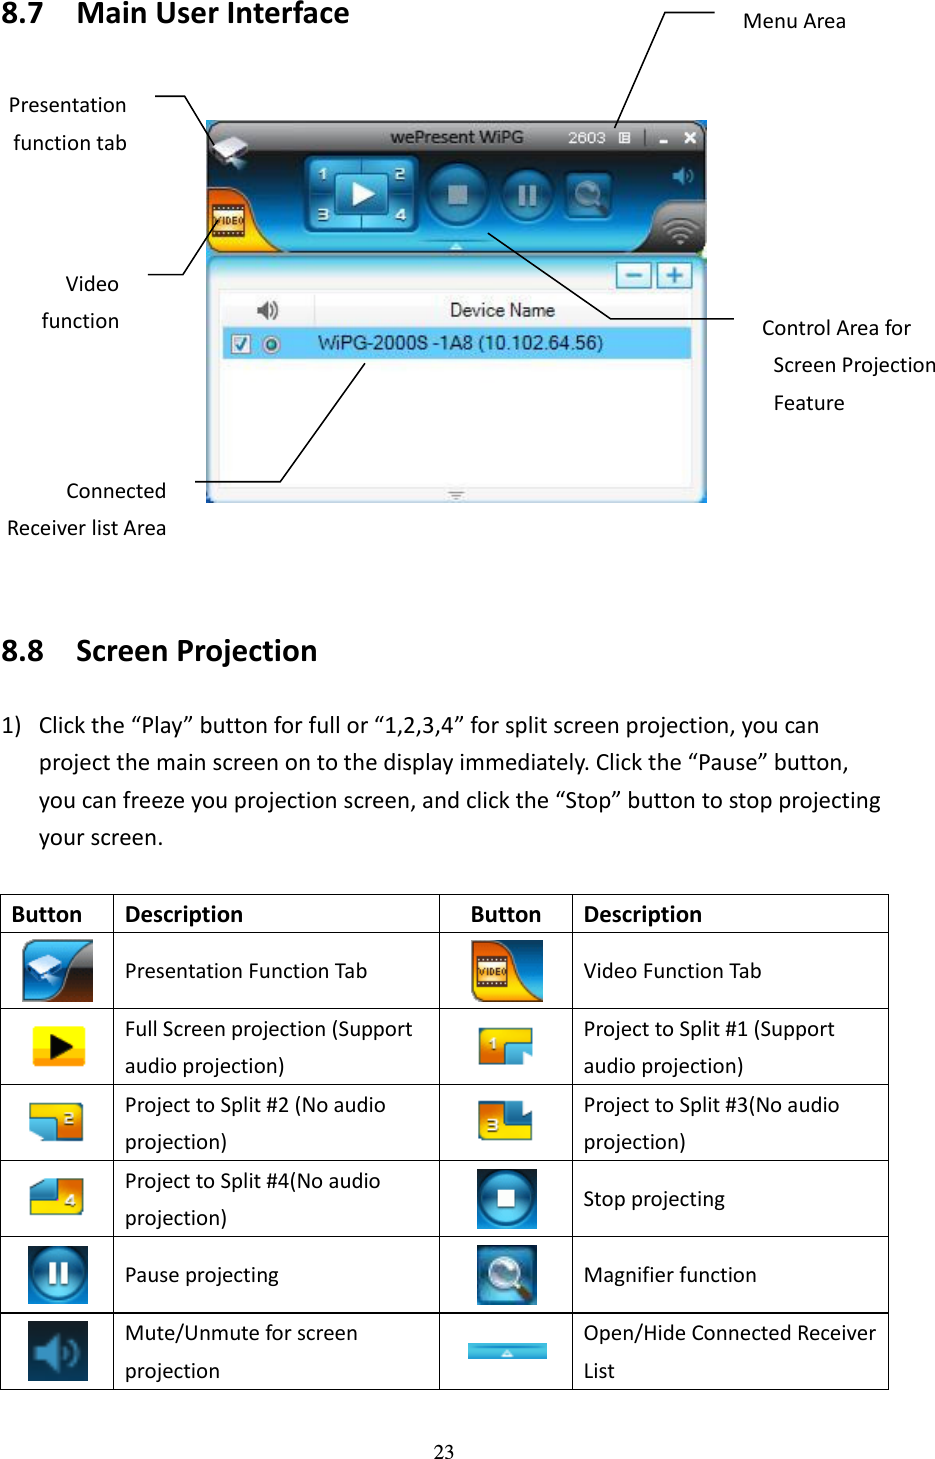   23 8.7 Main User Interface         8.8 Screen Projection 1) Click the “Play” button for full or “1,2,3,4” for split screen projection, you can project the main screen on to the display immediately. Click the “Pause” button, you can freeze you projection screen, and click the “Stop” button to stop projecting your screen.    Button Description Button Description  Presentation Function Tab  Video Function Tab  Full Screen projection (Support audio projection)  Project to Split #1 (Support audio projection)  Project to Split #2 (No audio projection)  Project to Split #3(No audio projection)  Project to Split #4(No audio projection)  Stop projecting  Pause projecting  Magnifier function  Mute/Unmute for screen projection  Open/Hide Connected Receiver List  Control Area for Screen Projection Feature Menu Area Video   function tab Presentation function tab Connected   Receiver list Area 